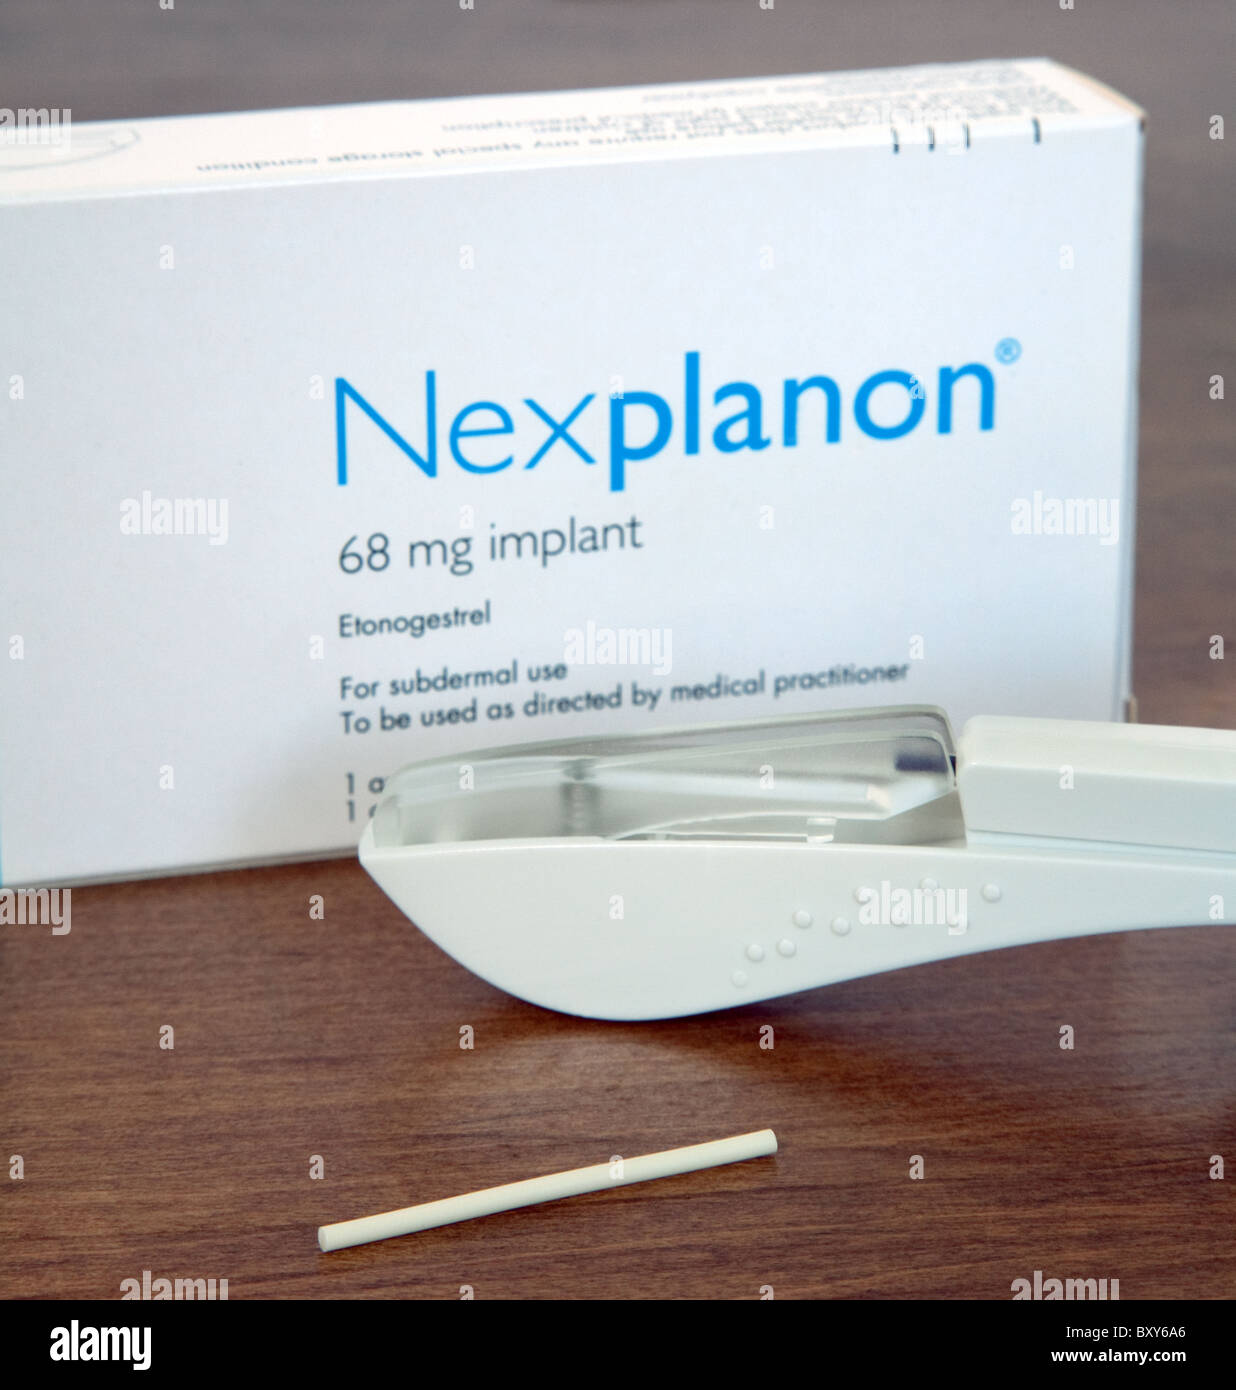 The Nexplanon female long term contraceptive implant for long acting reversible contraception Stock Photo